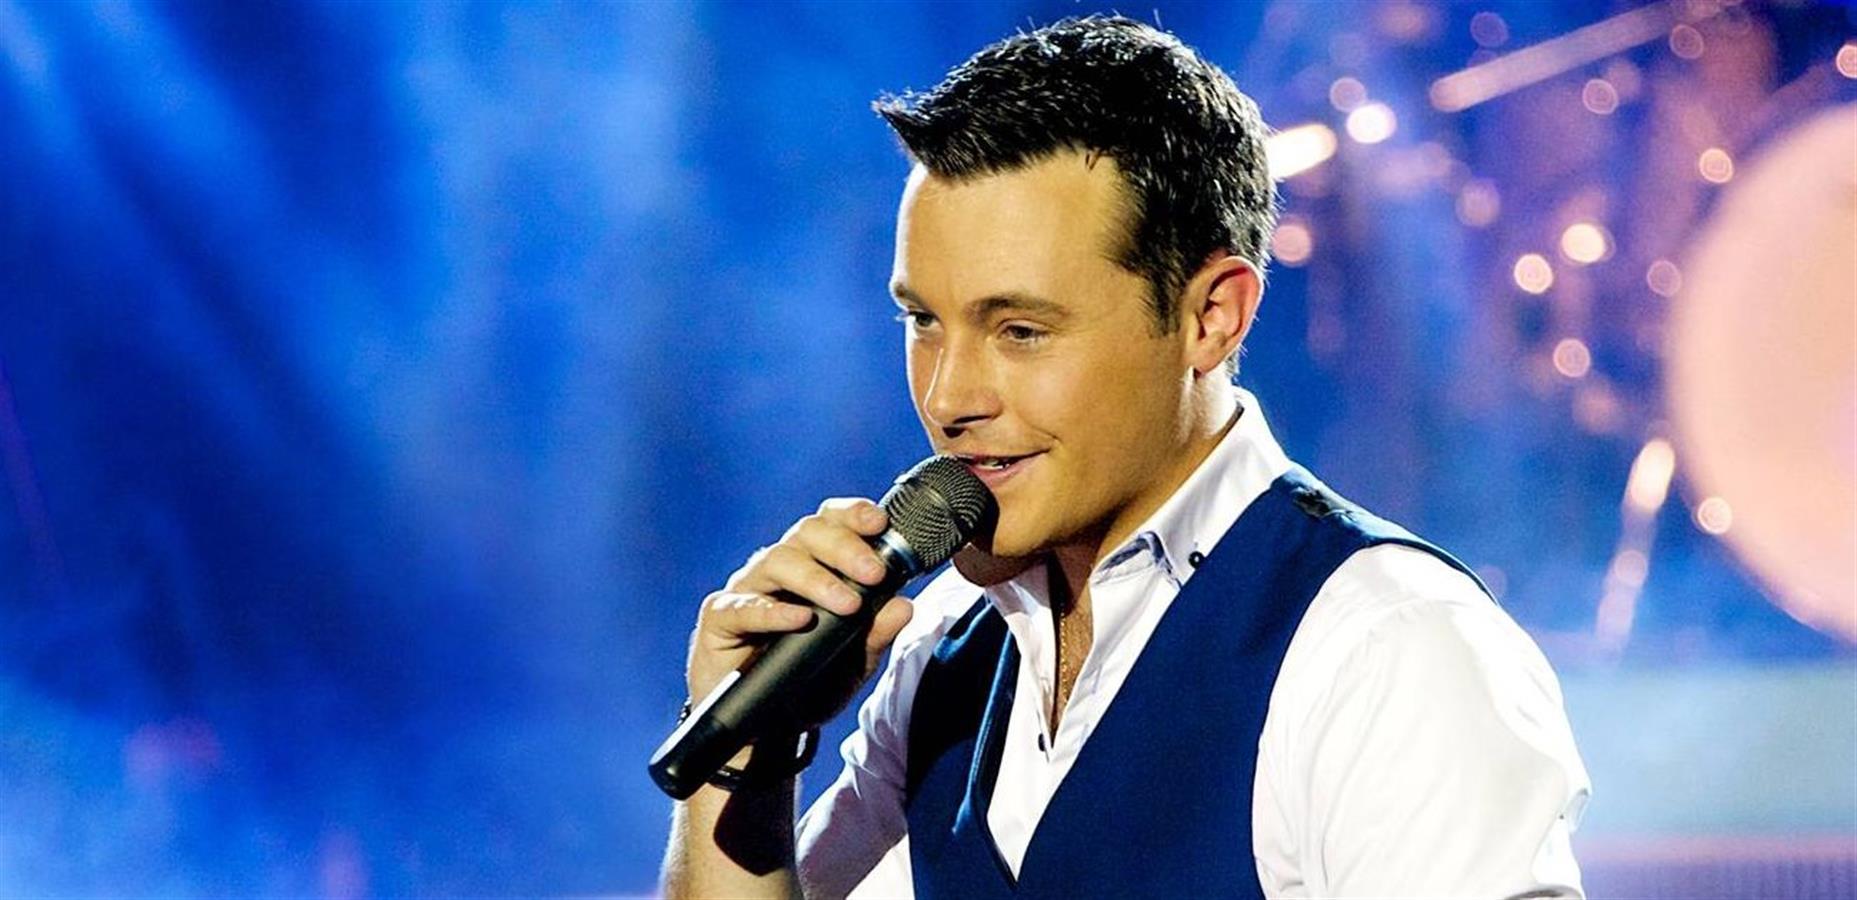 Nathan Carter and his Band tickets